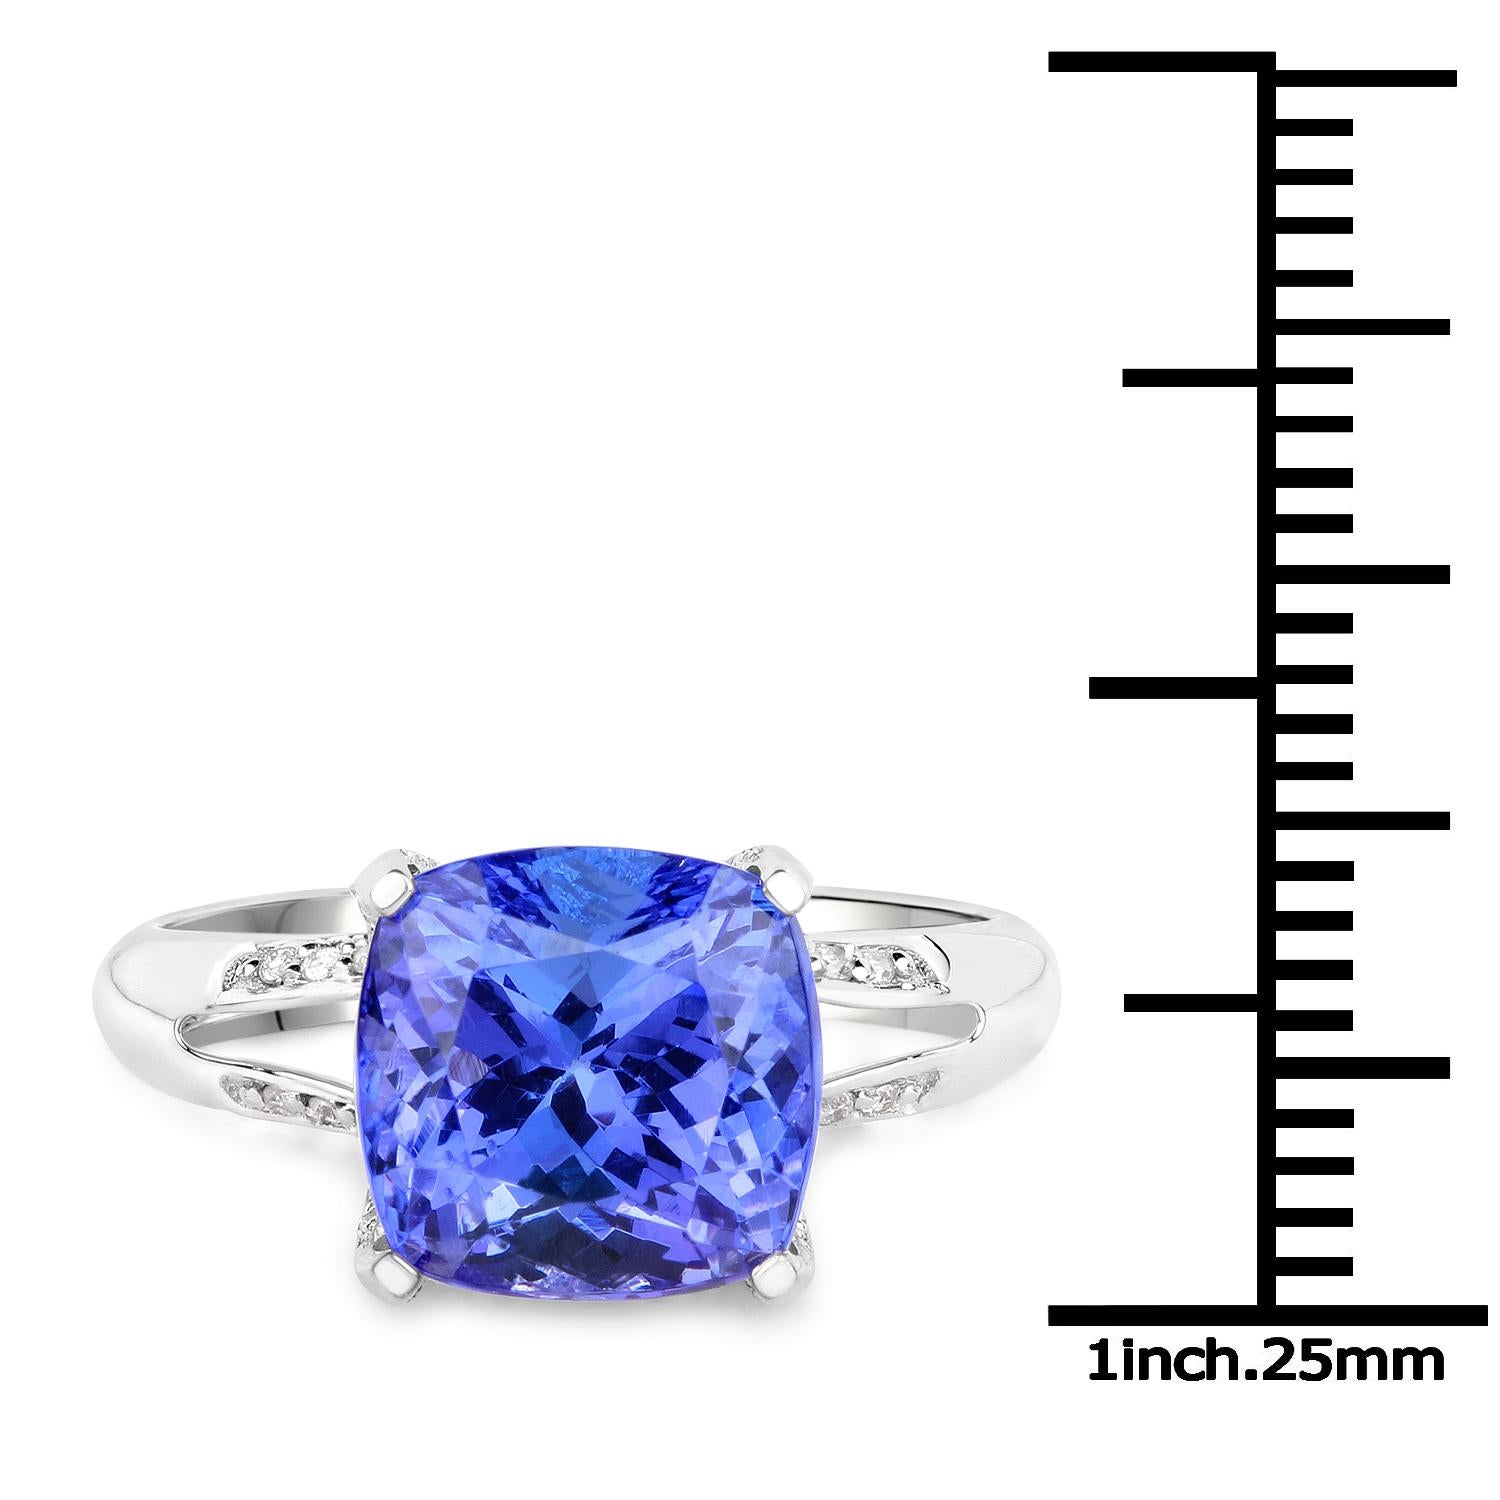 5.59 Carat Genuine Tanzanite and Diamond 14 Karat White Gold Cocktail Ring In New Condition For Sale In Great Neck, NY